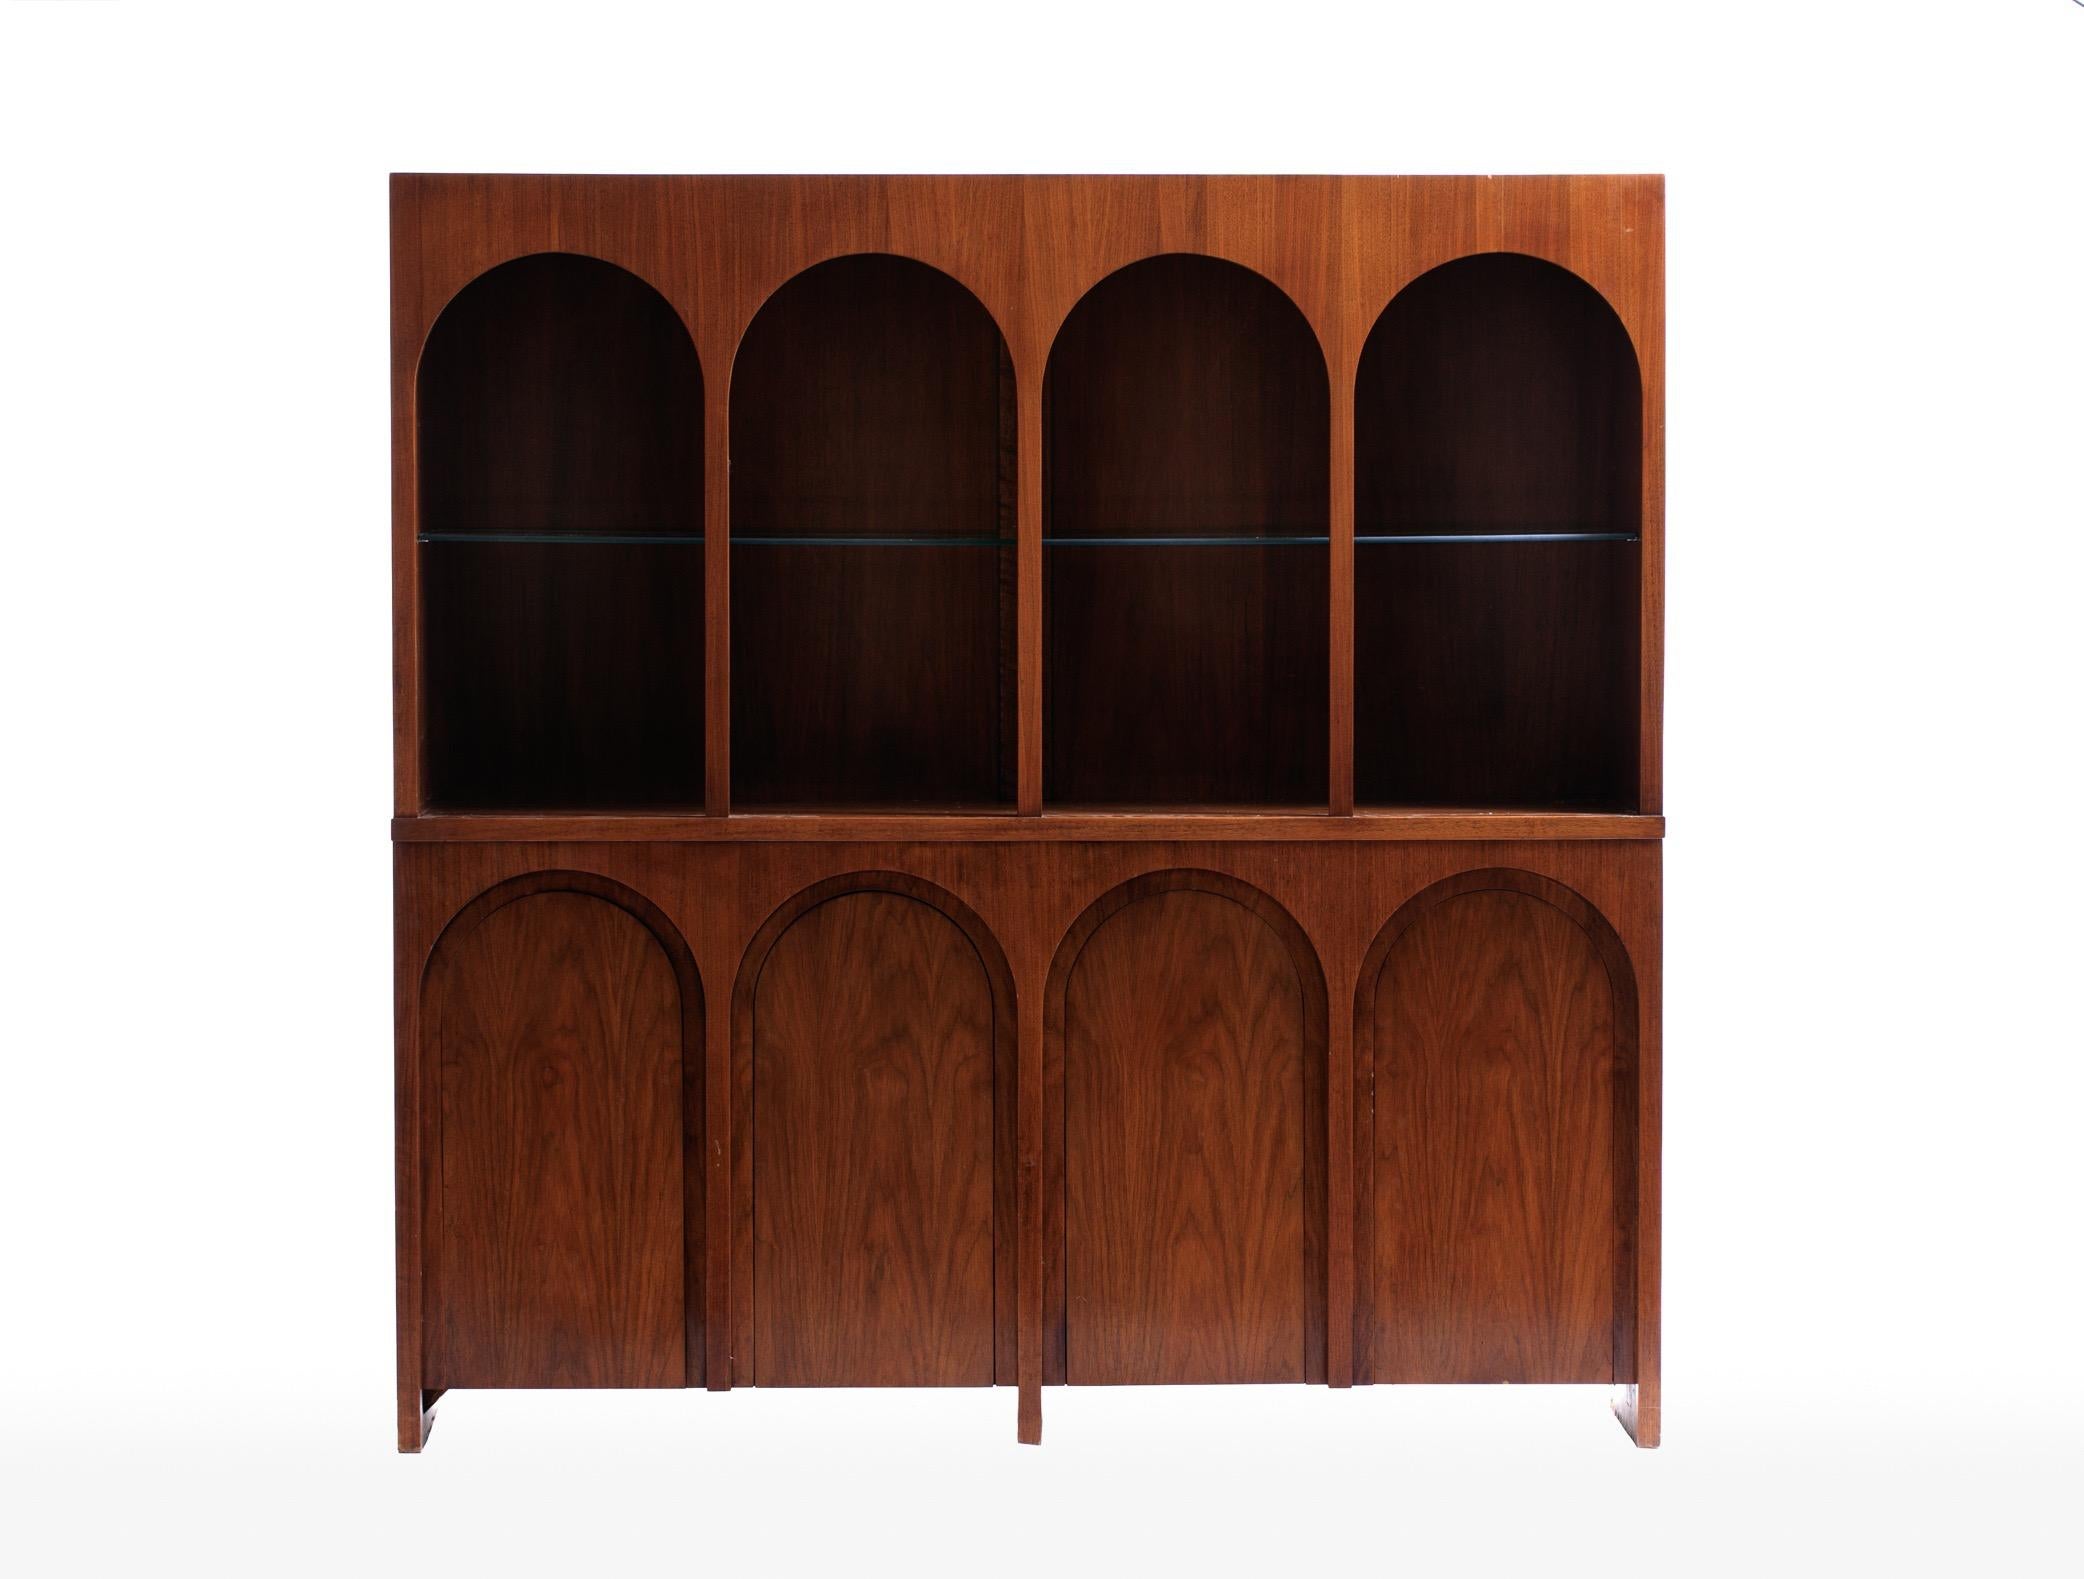 Coliseum cabinet designed by T. H. Robsjohng-Gibbings for Widdicomb. Architectural display cabinet with illuminated interior, adjustable glass shelves, the cabinet doors echo the design of a coliseum. Price included refinishing. Widdicomb label in